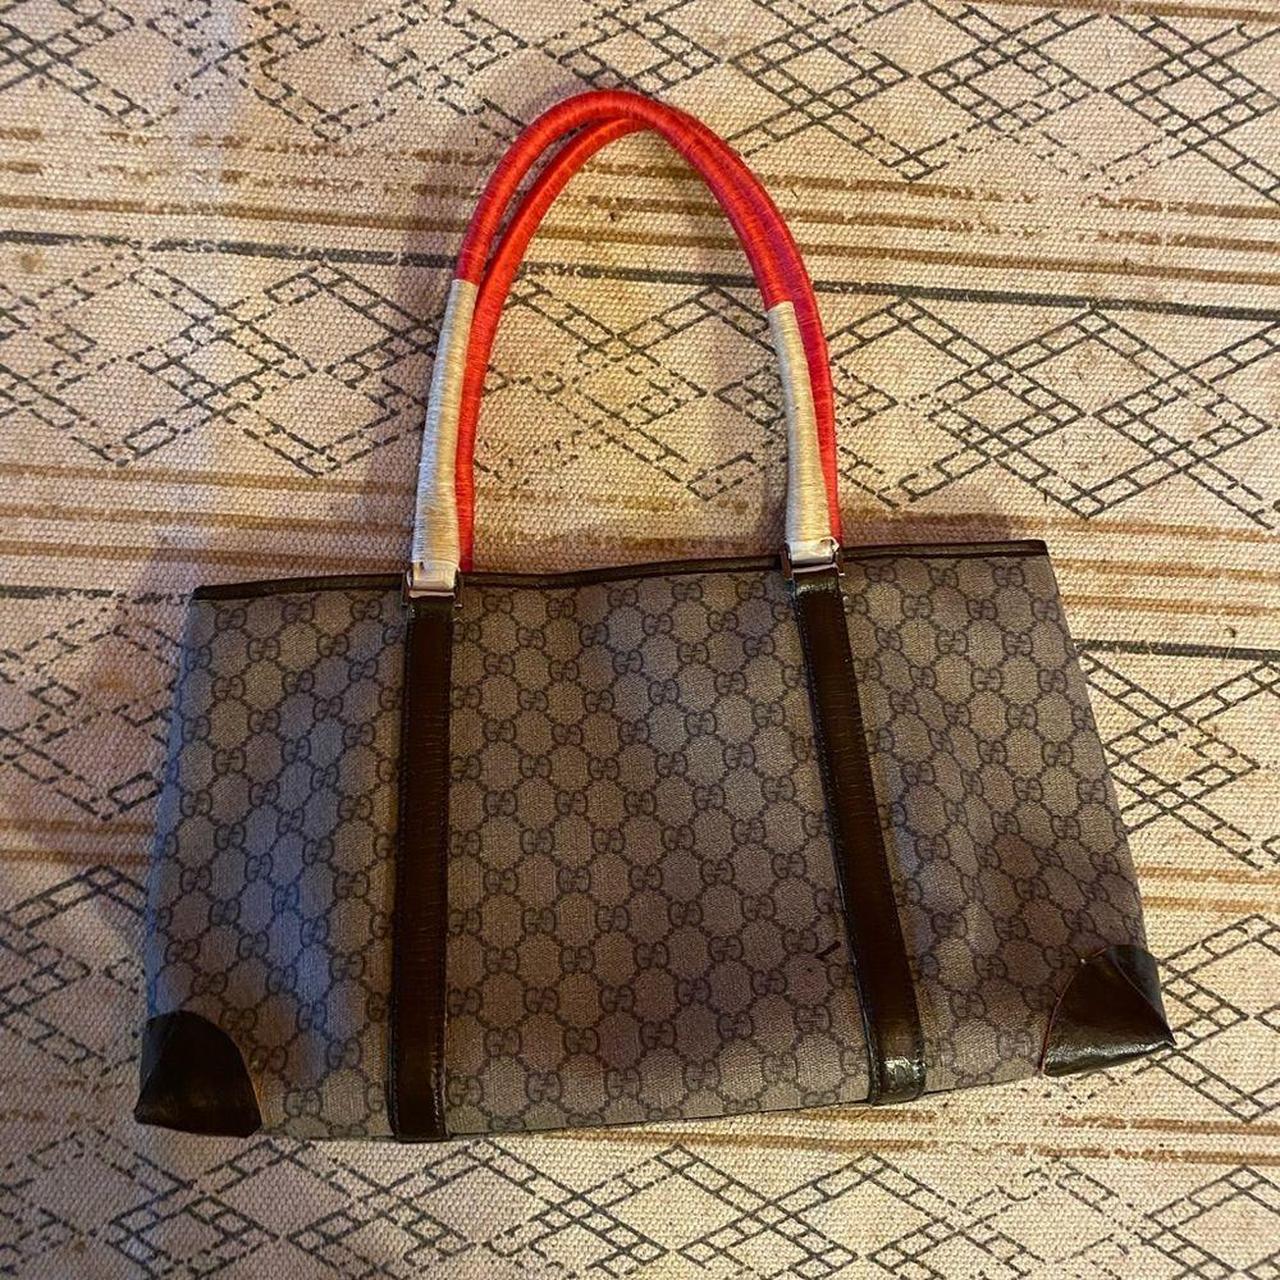 Gucci Women's Tan and Red Bag (2)